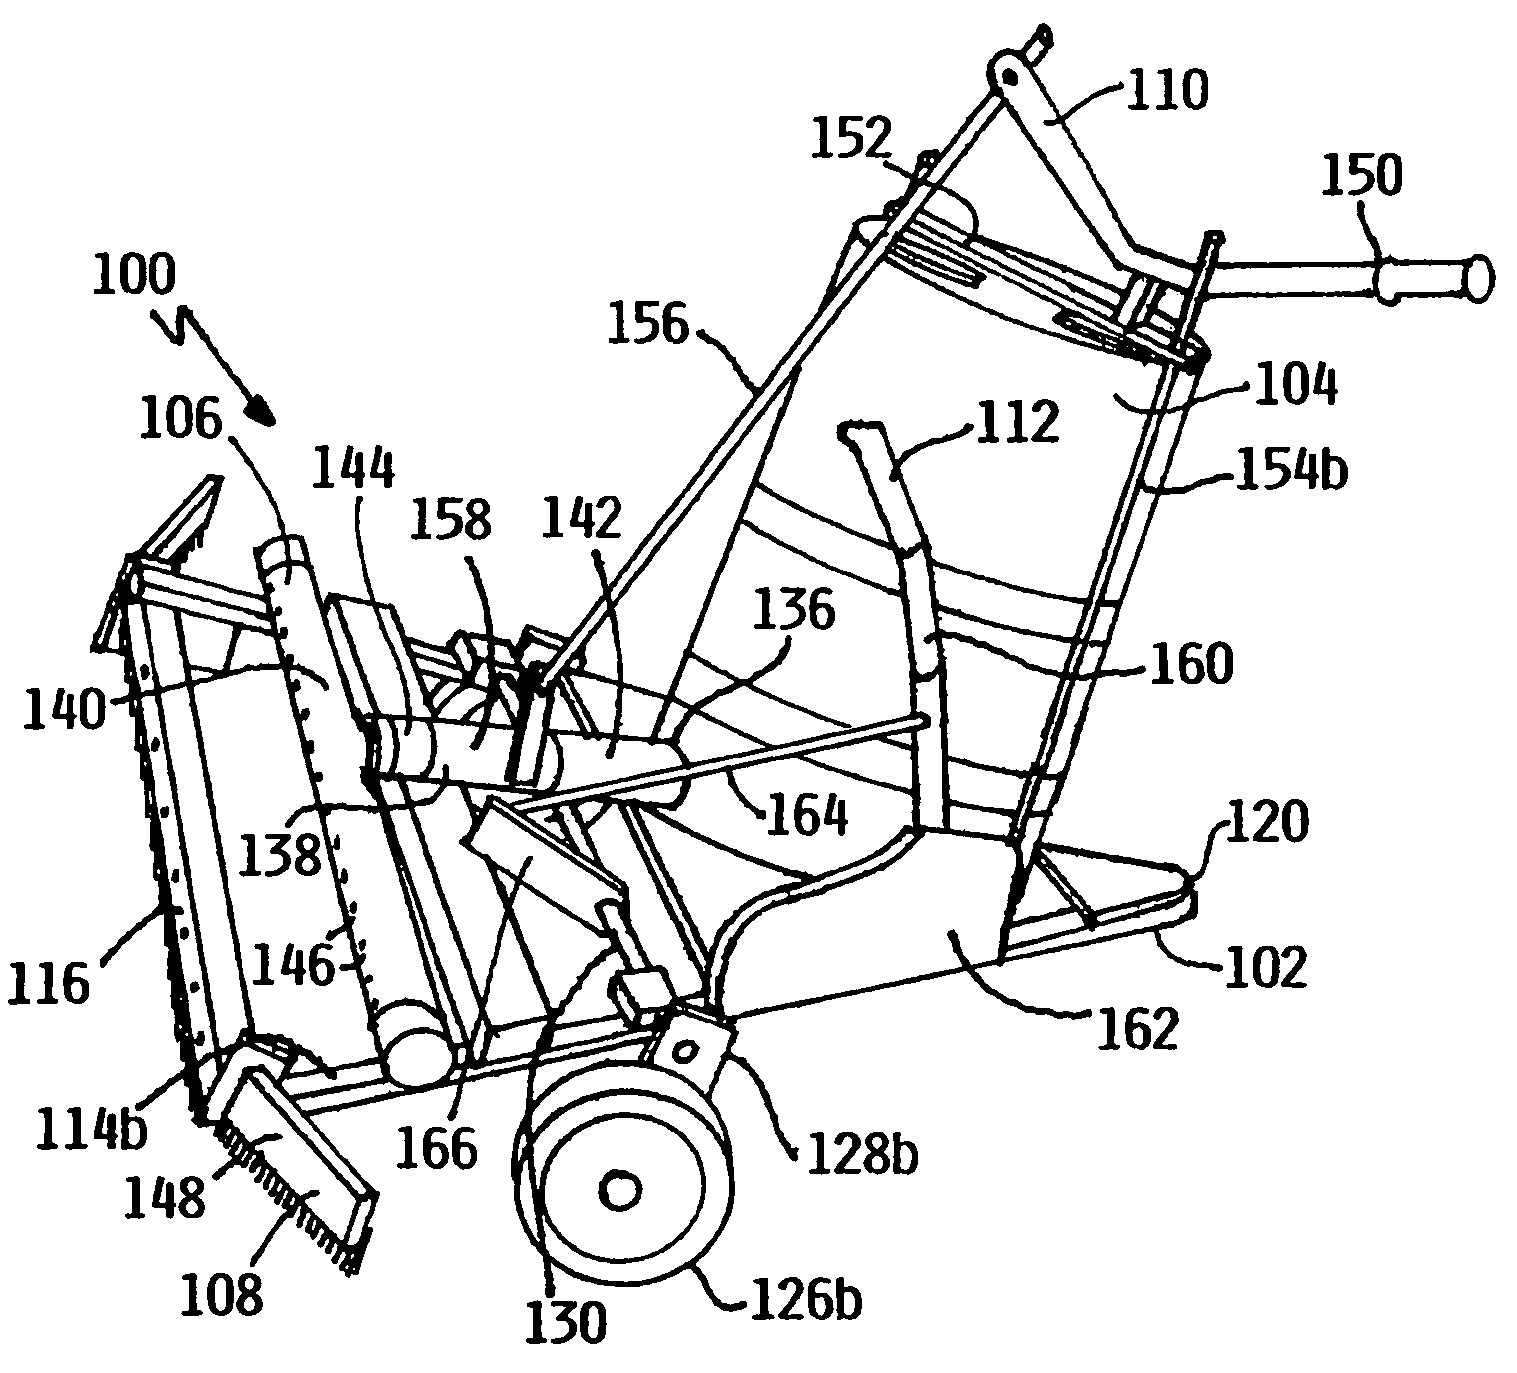 Residential sealcoating machine having cleanable manifold